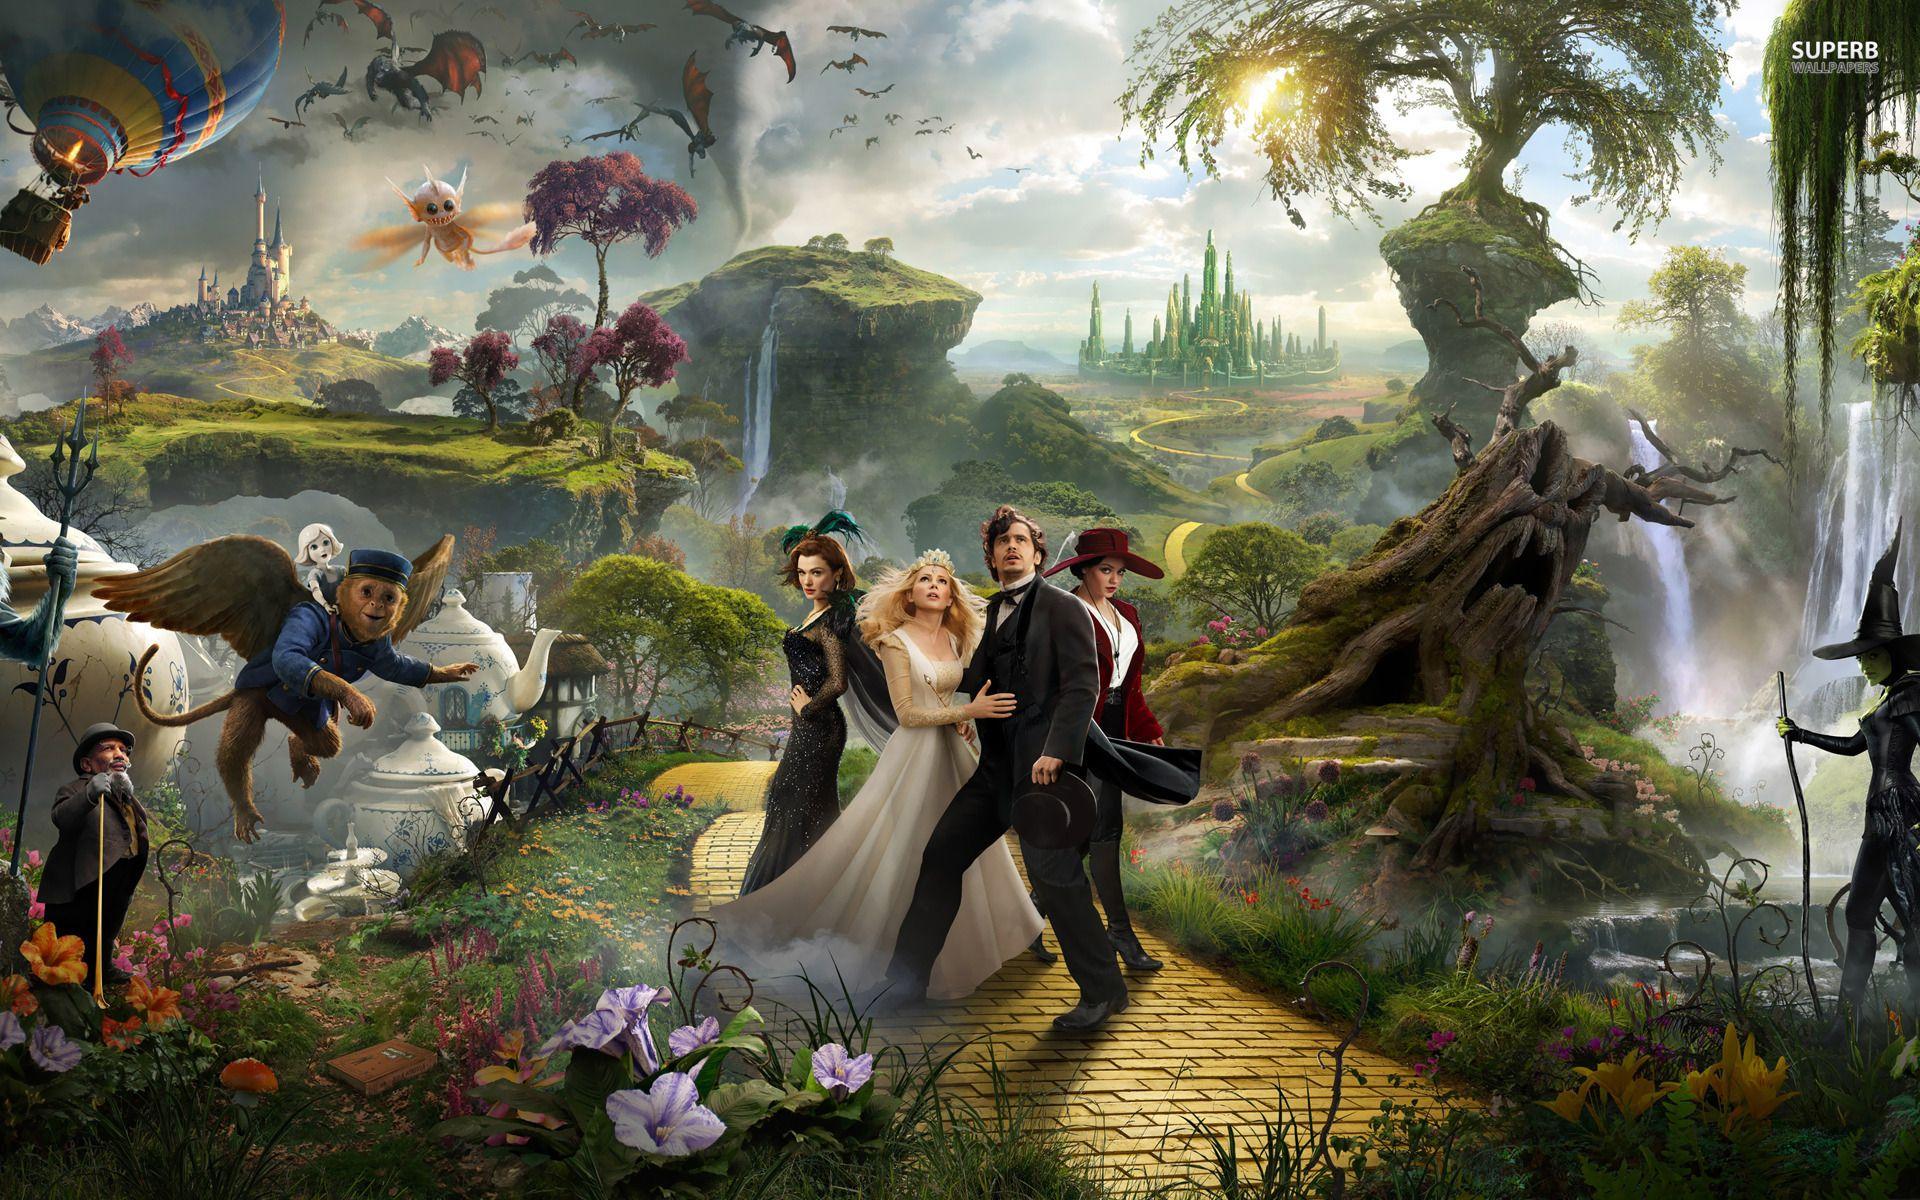 Oz The Great And Powerful. Movie Wallpaper, Happy New Year